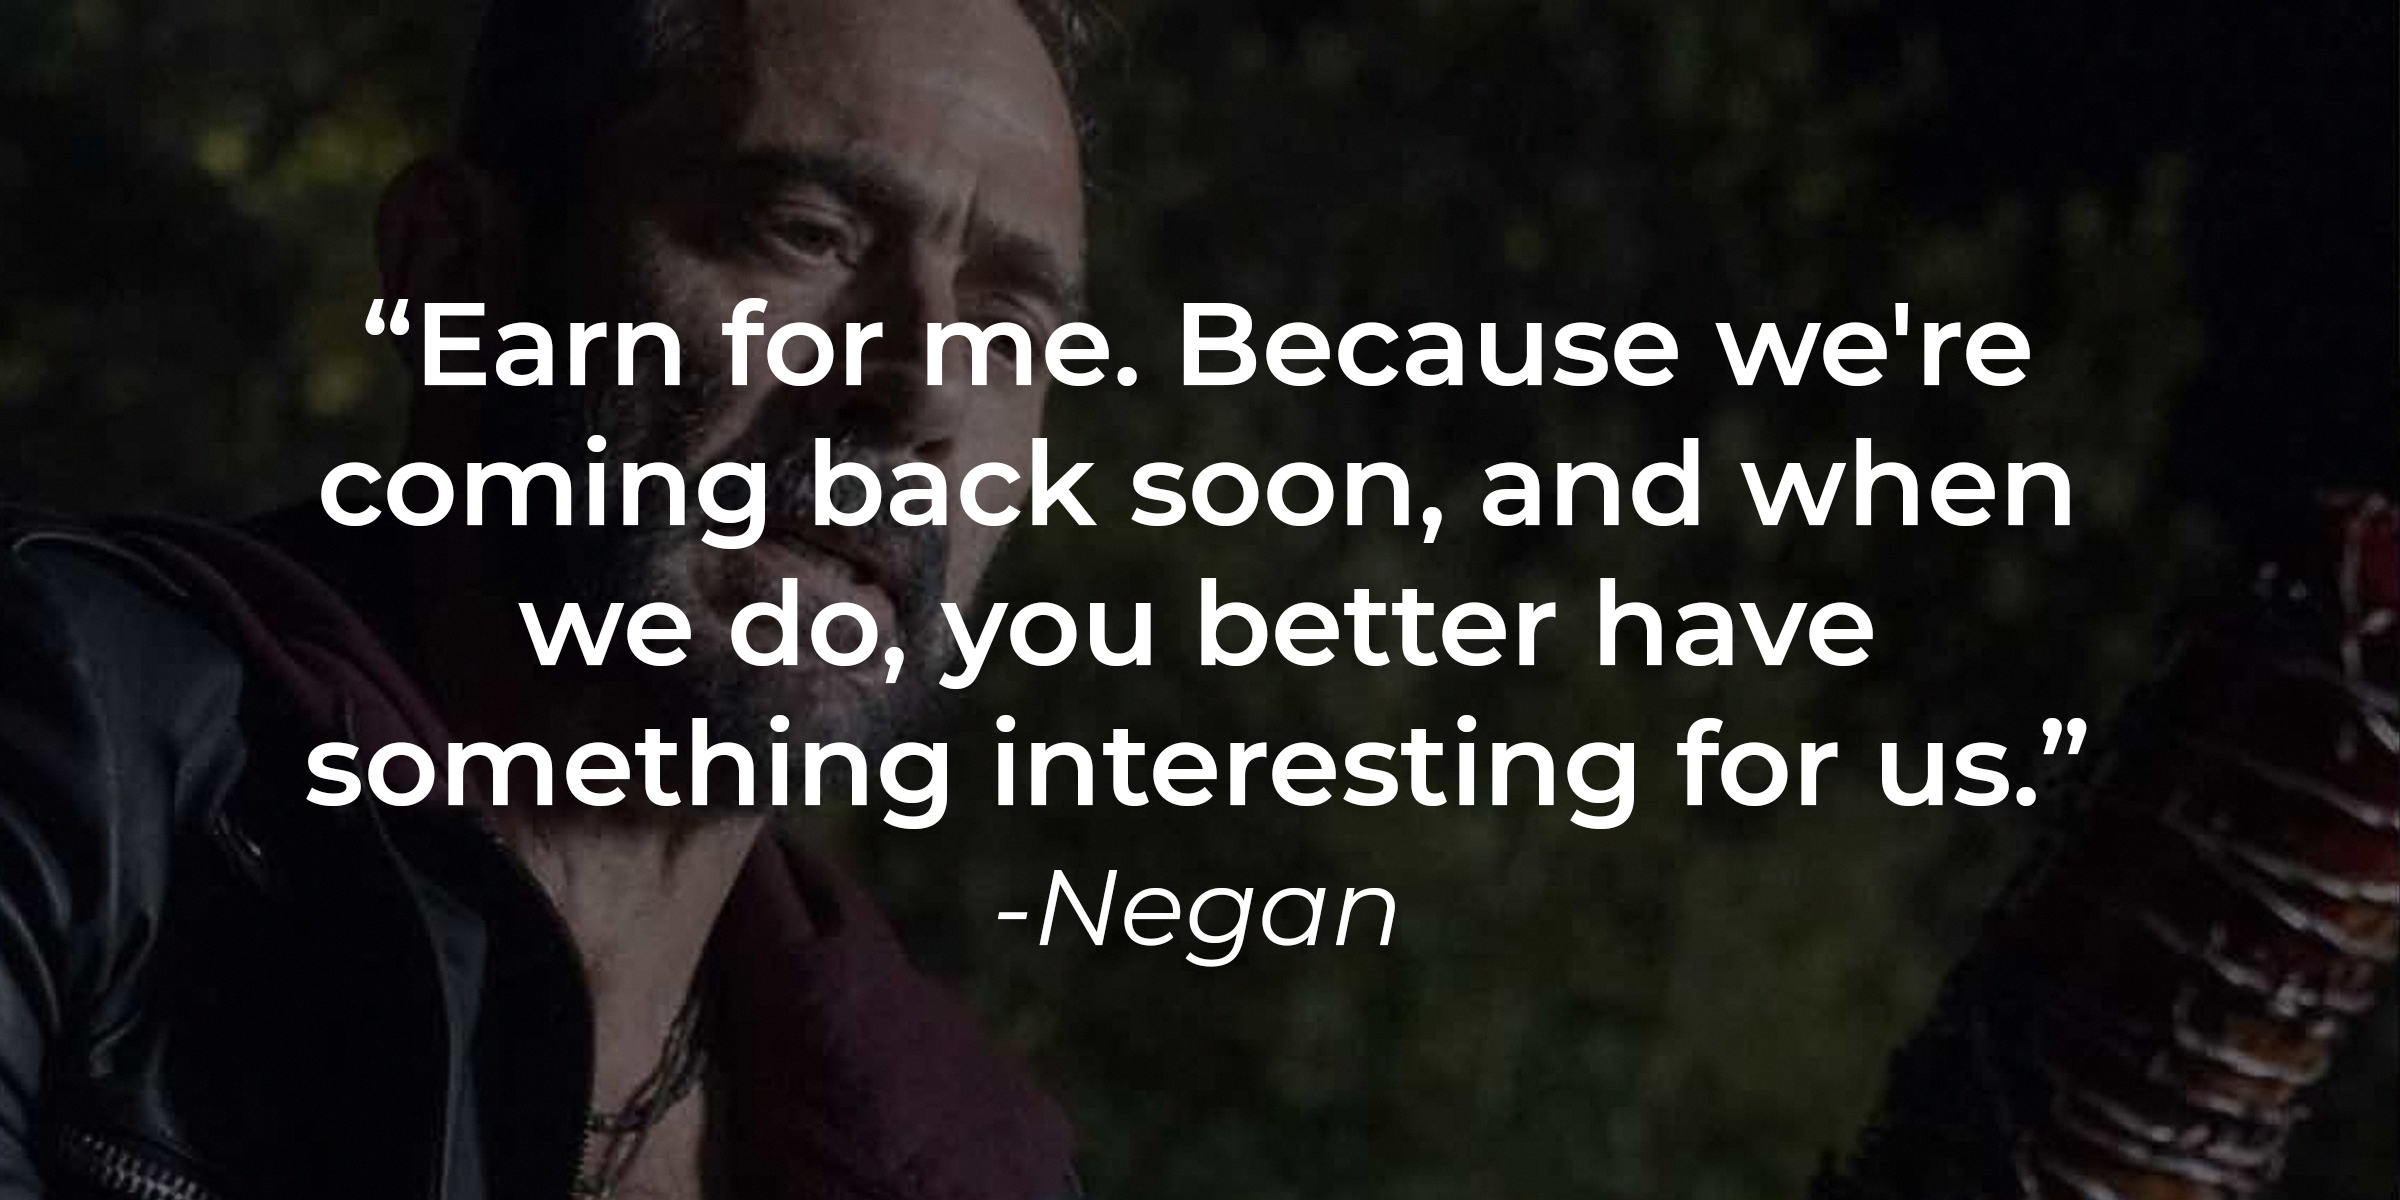 Negan's quote: "Earn for me. Because we are coming back soon, and when we do, you better have something interesting for us." | Source: Facebook/TheWalkingDeadAMC